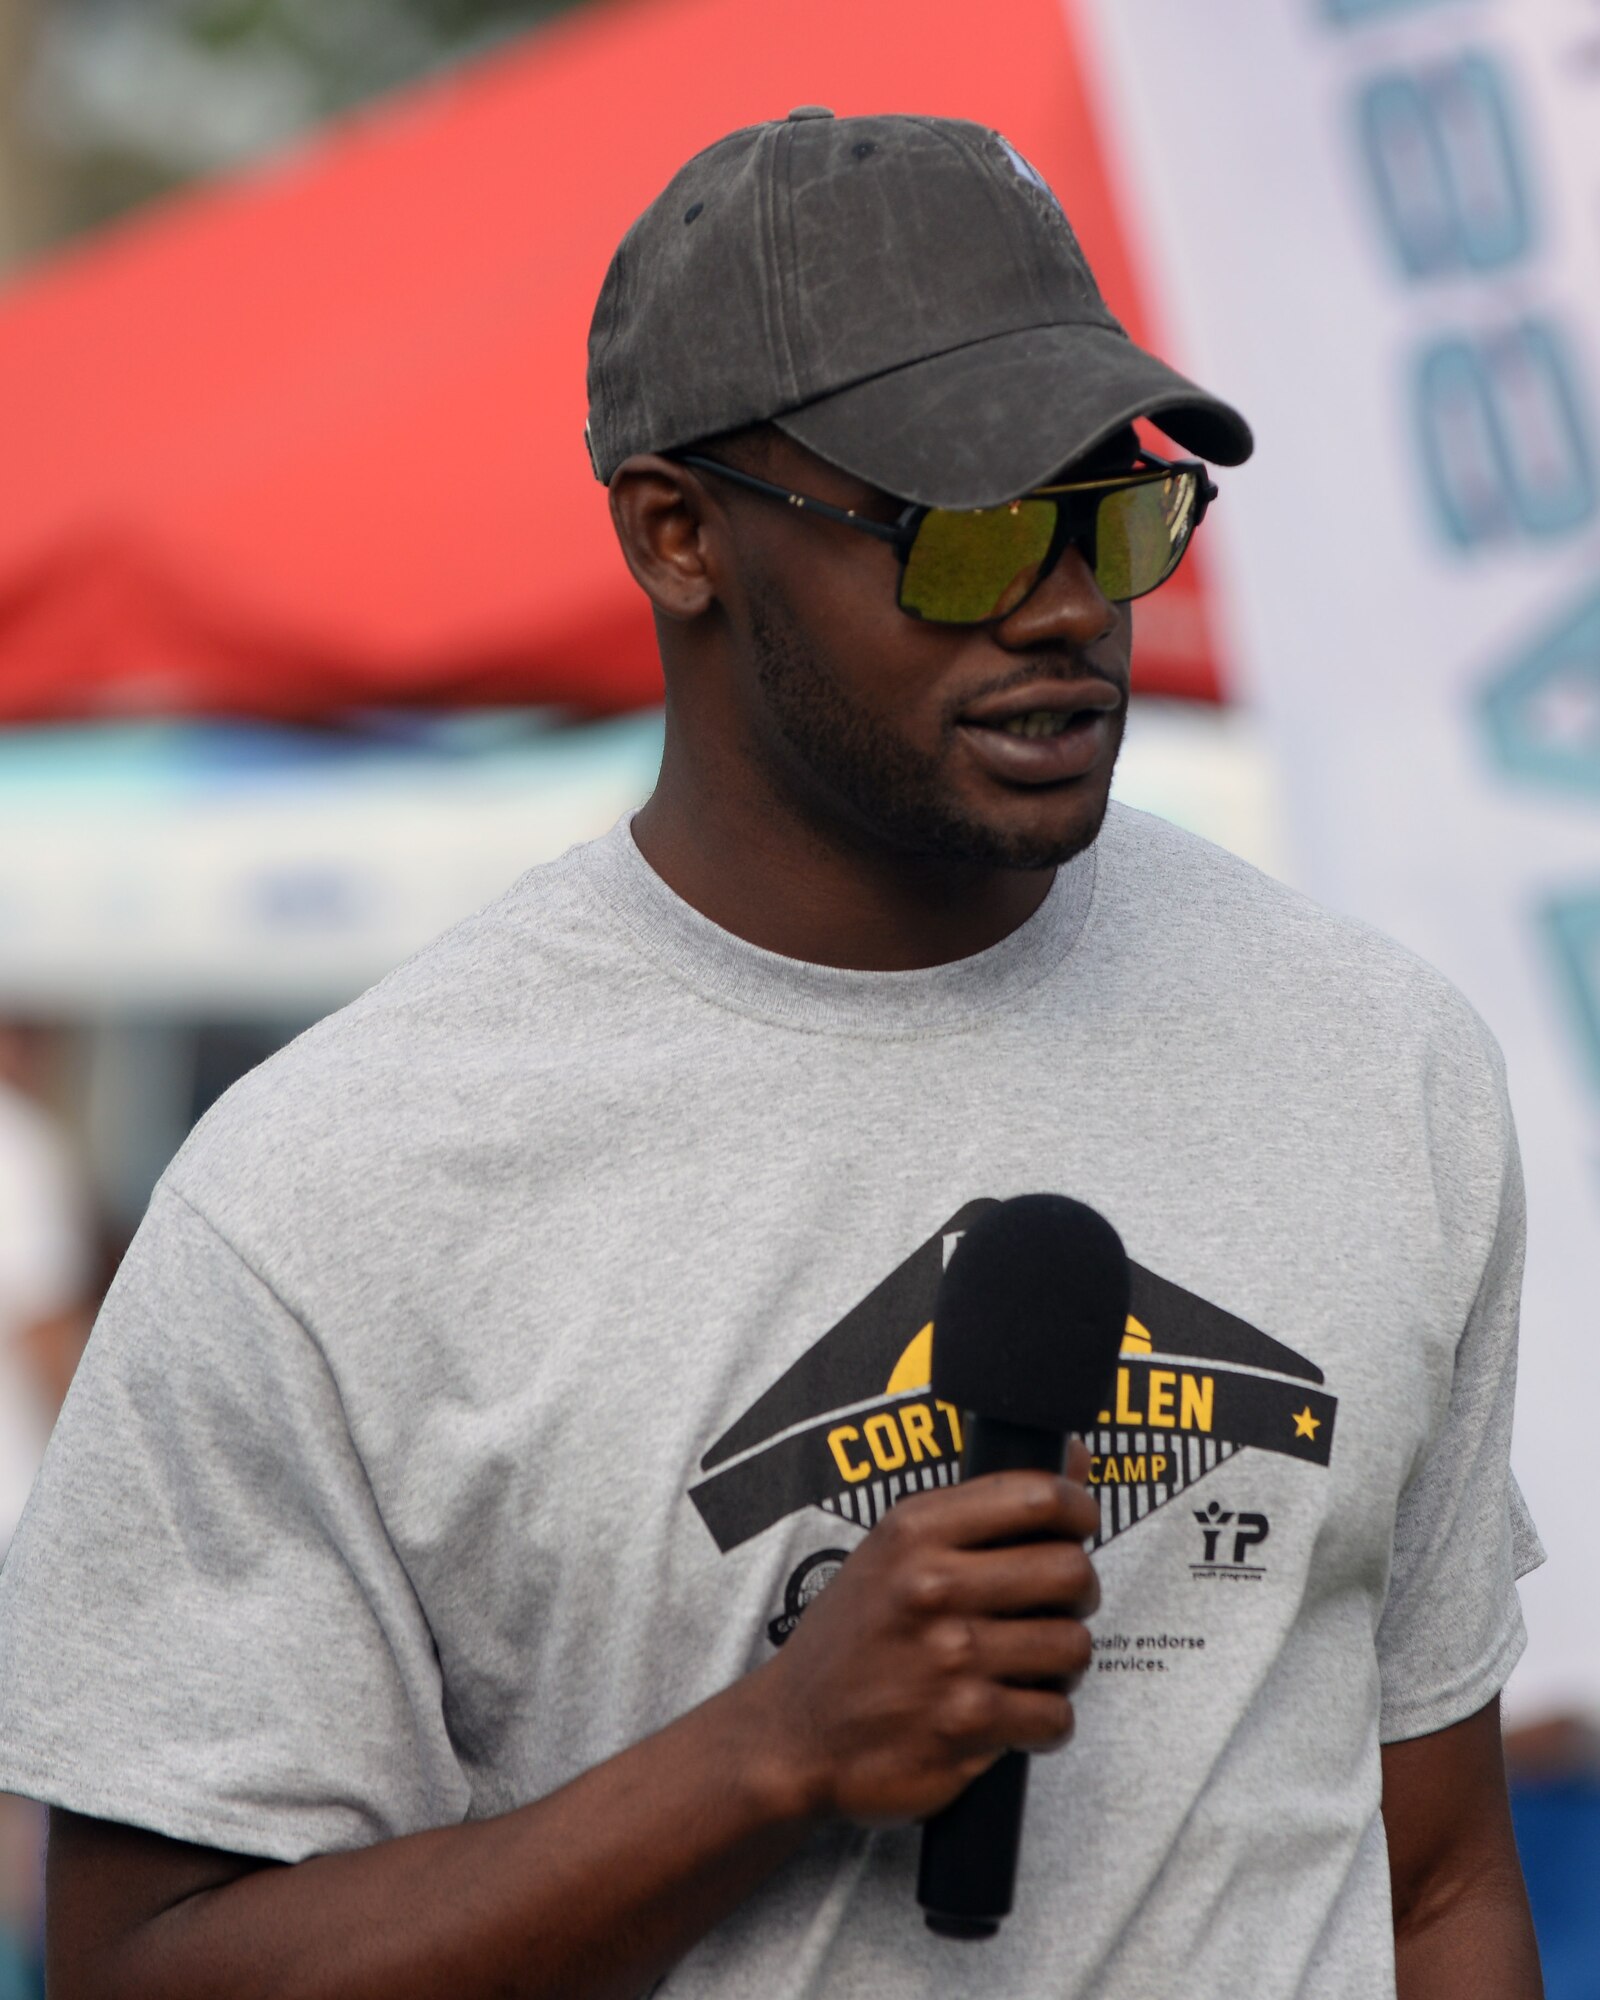 Cortez Allen, Pittsburgh Steelers defensive back, speaks to young athletes during a National Football League ProCamp, July 17, 2015, at Seymour Johnson Air Force Base, North Carolina. Children were encouraged to learn their teammates’ names and assume leadership roles during the two-day camp. (U.S. Air Force photo/Senior Airman John Nieves Camacho)